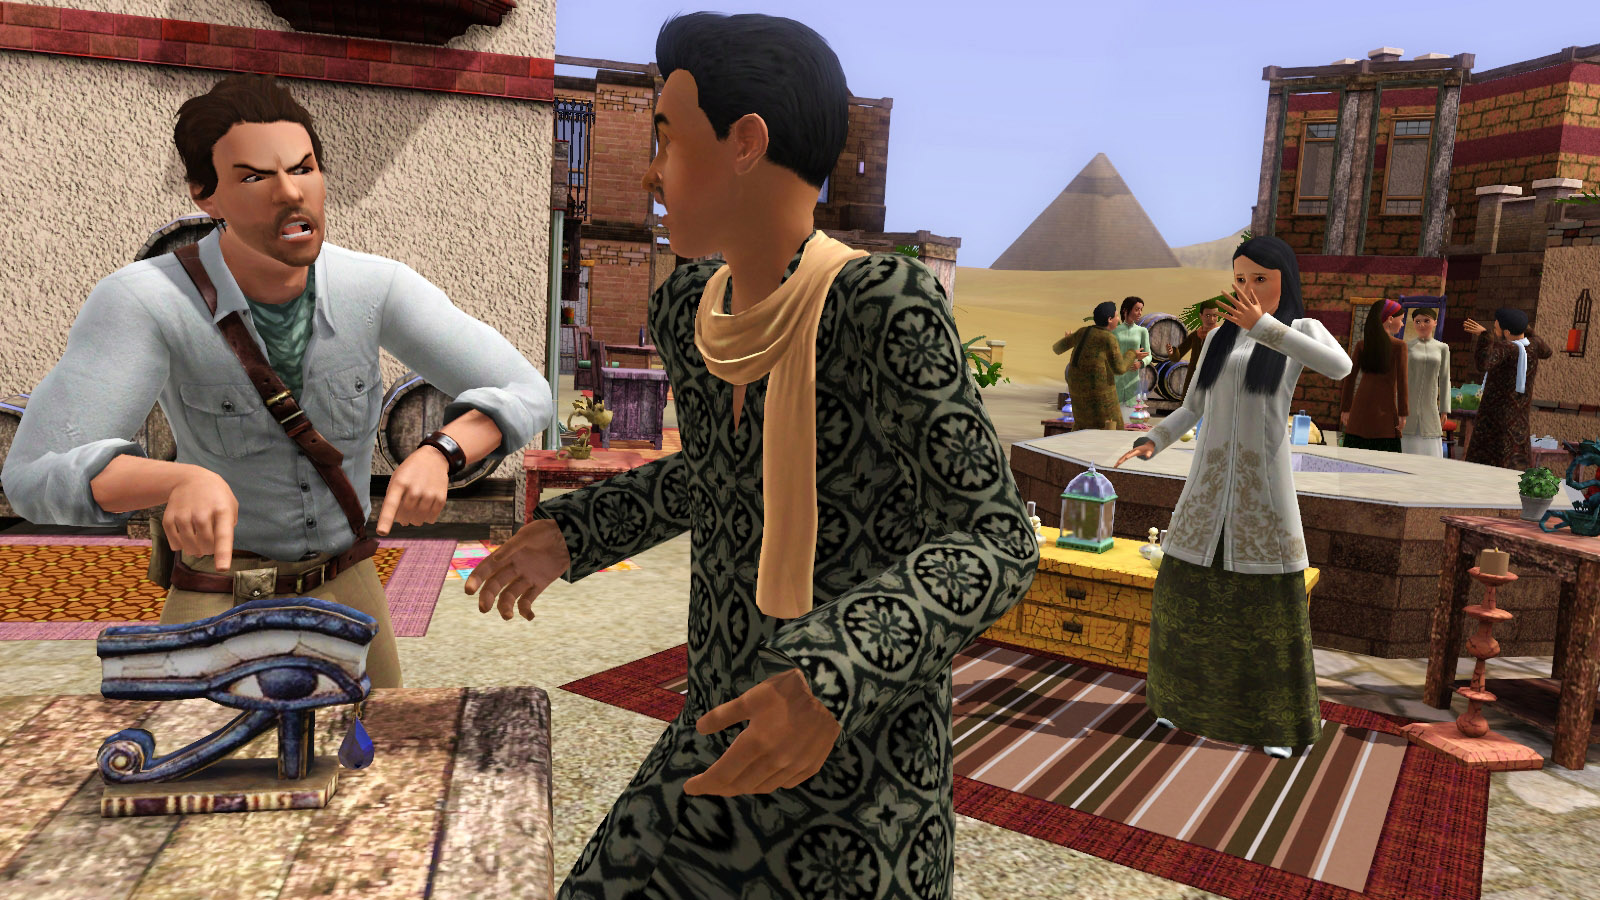 http://www.thesims3.com/content/global/images/news/screen_3_nonwater.jpg